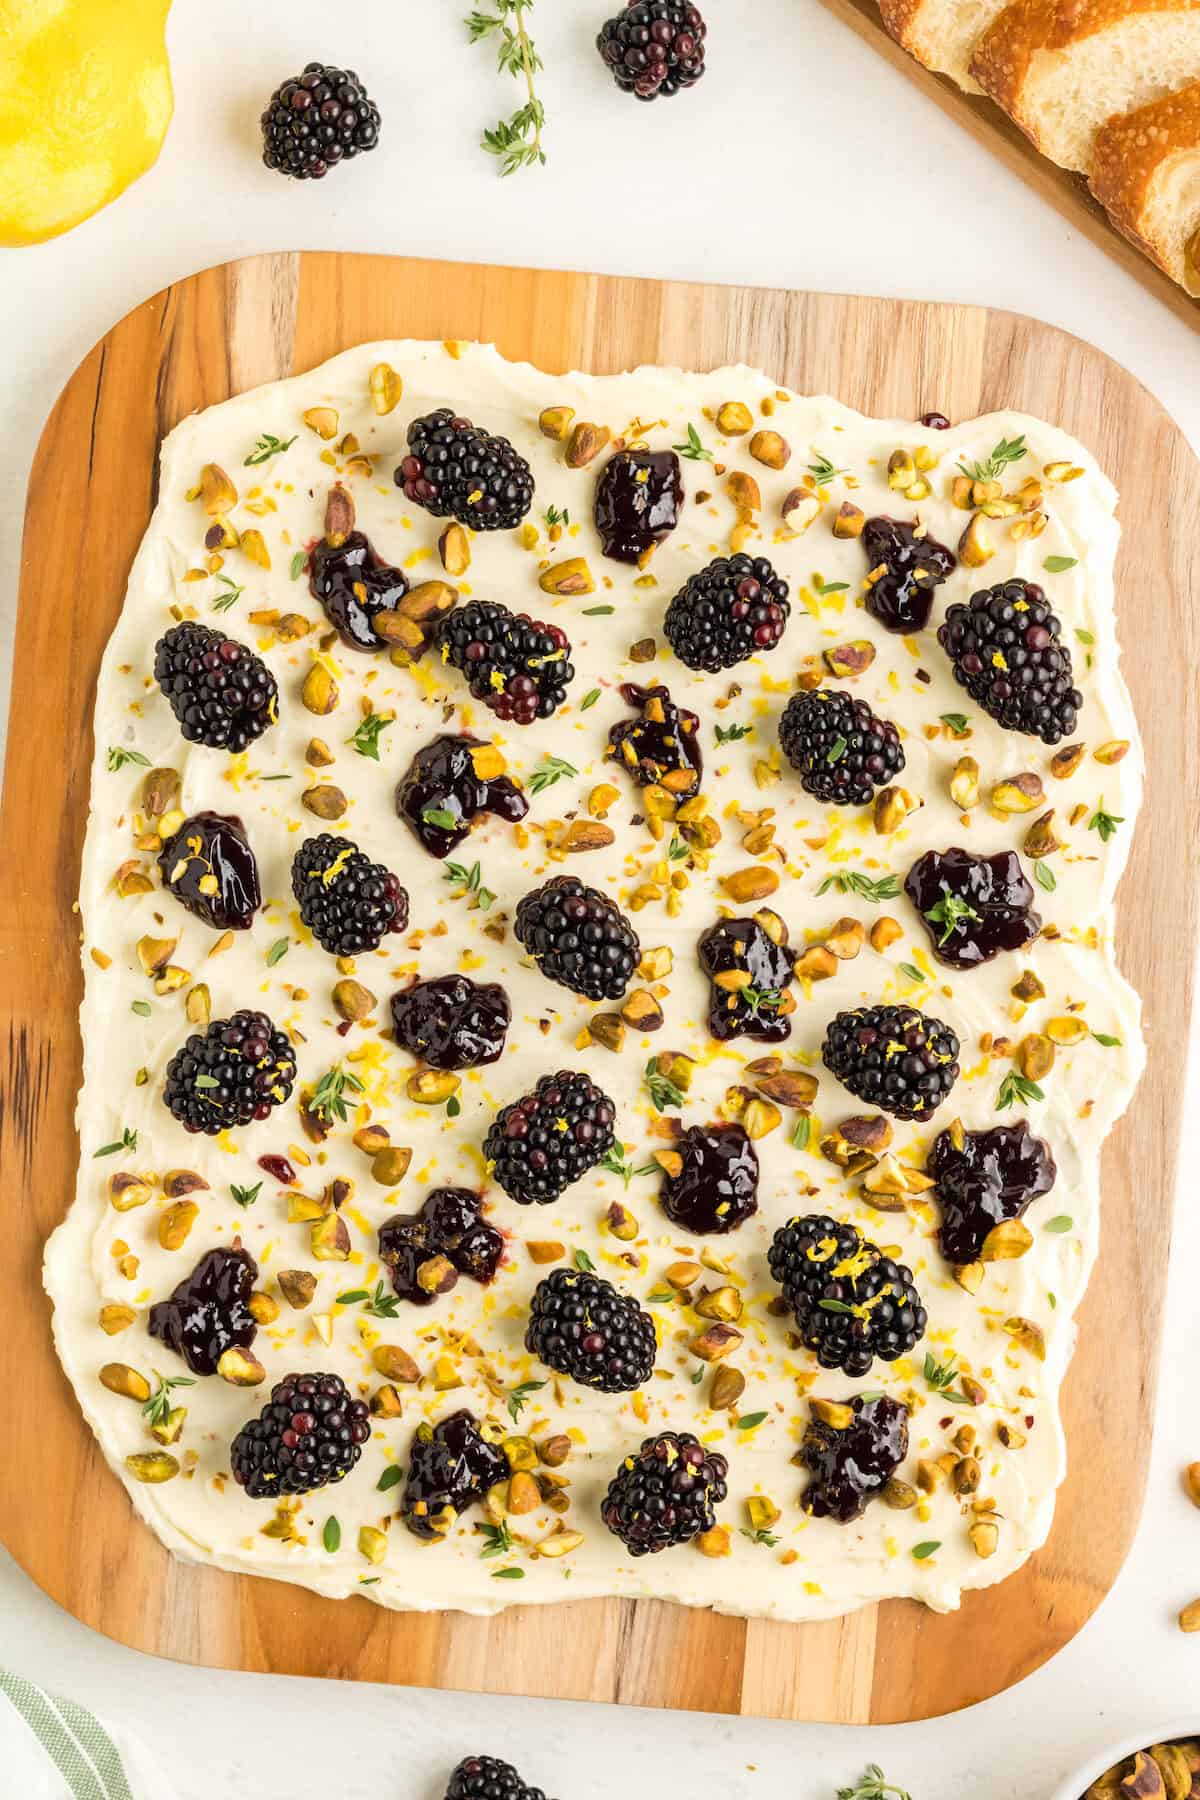 butter board with blackberries and pistachios with crusty bread to the side.